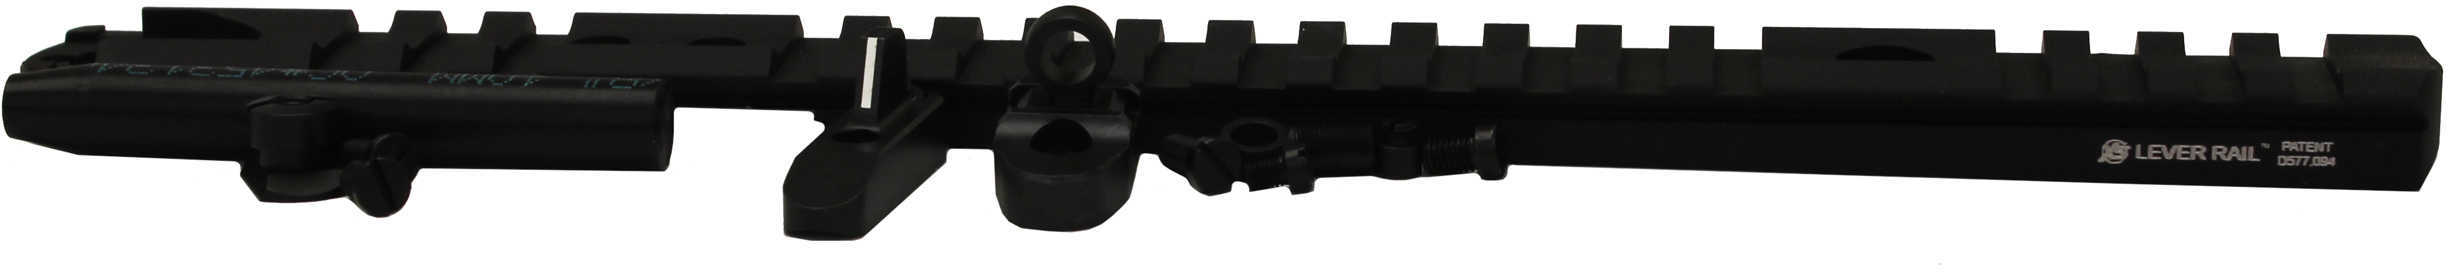 XS Sight Systems Lever Rail Ghost Ring Set For Marlin 1894 Round Bbl.